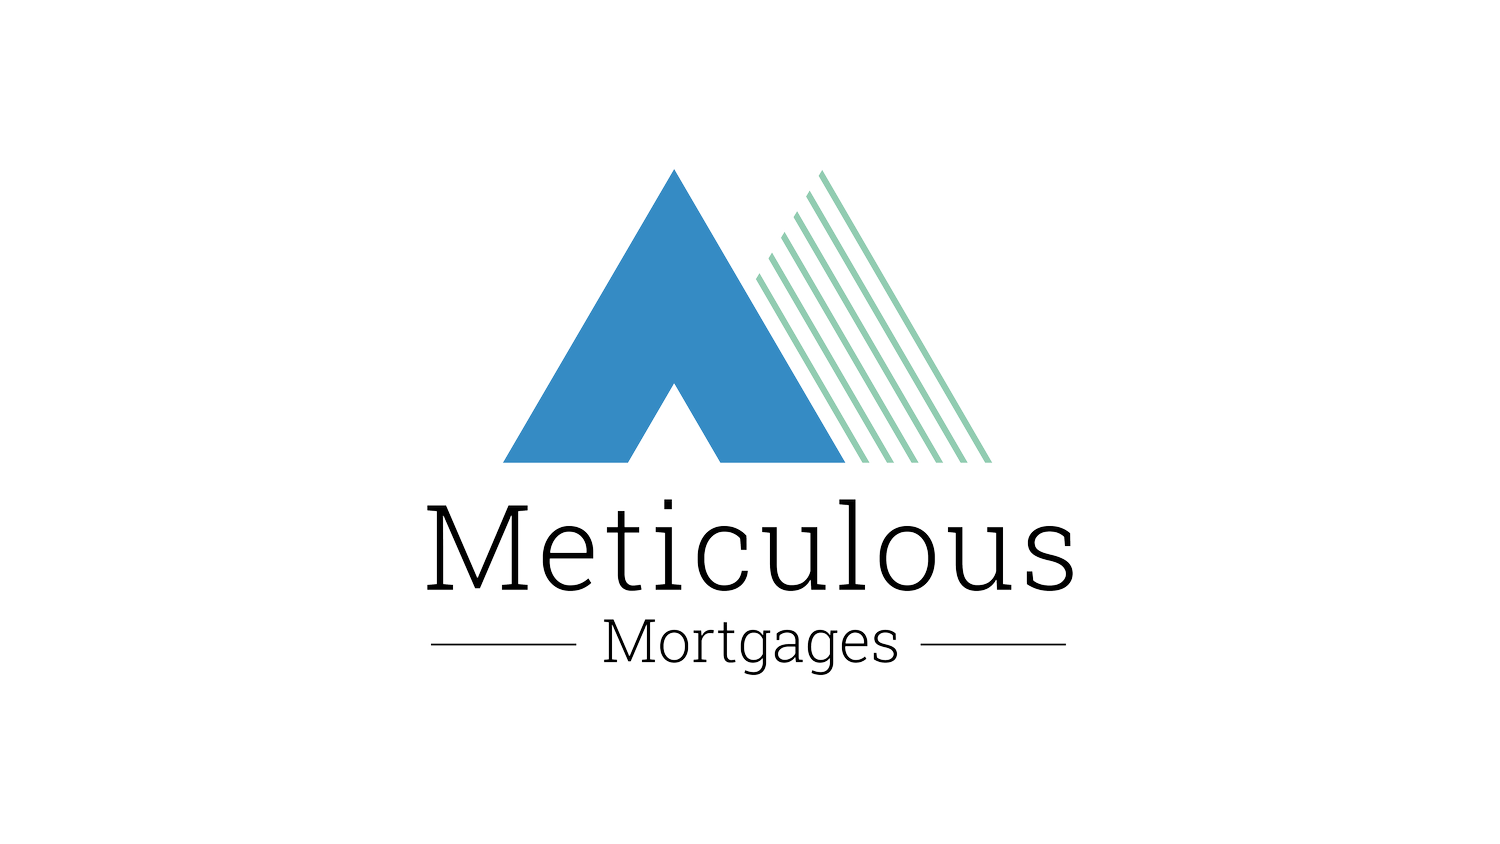 Meticulous Mortgages